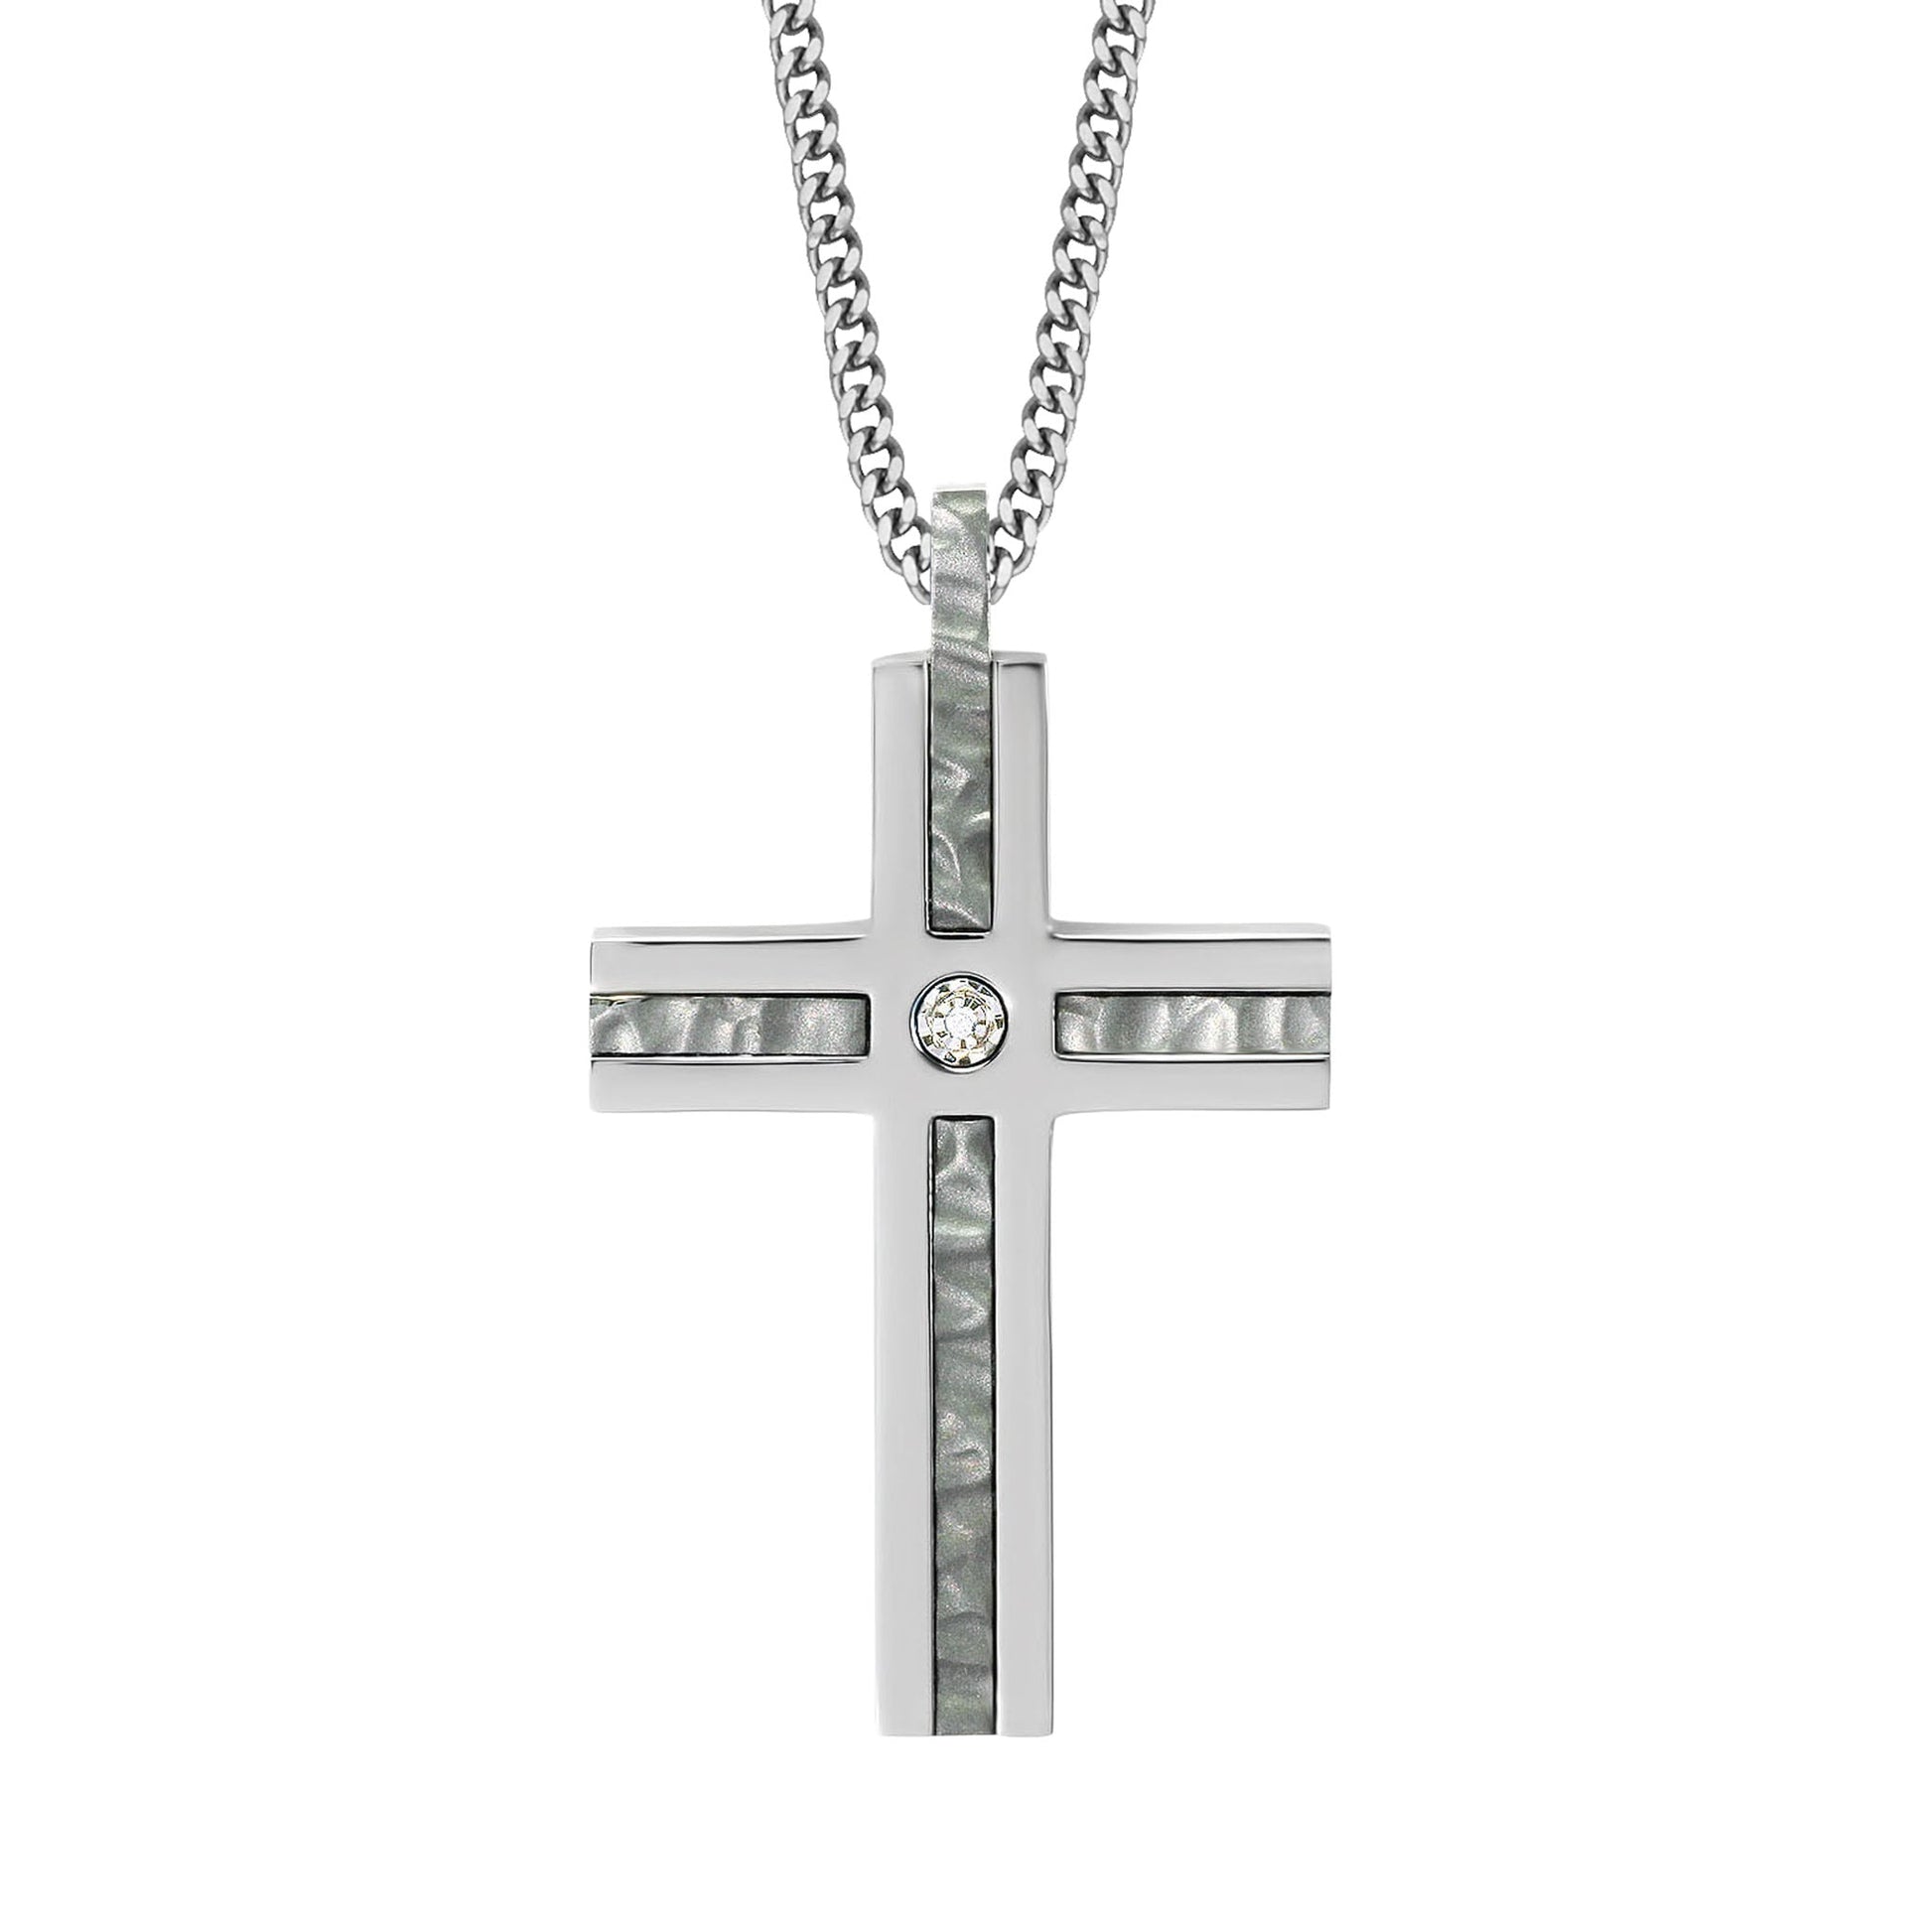 A stainless steel hammered finish cross with diamond on 24" chain displayed on a neutral white background.